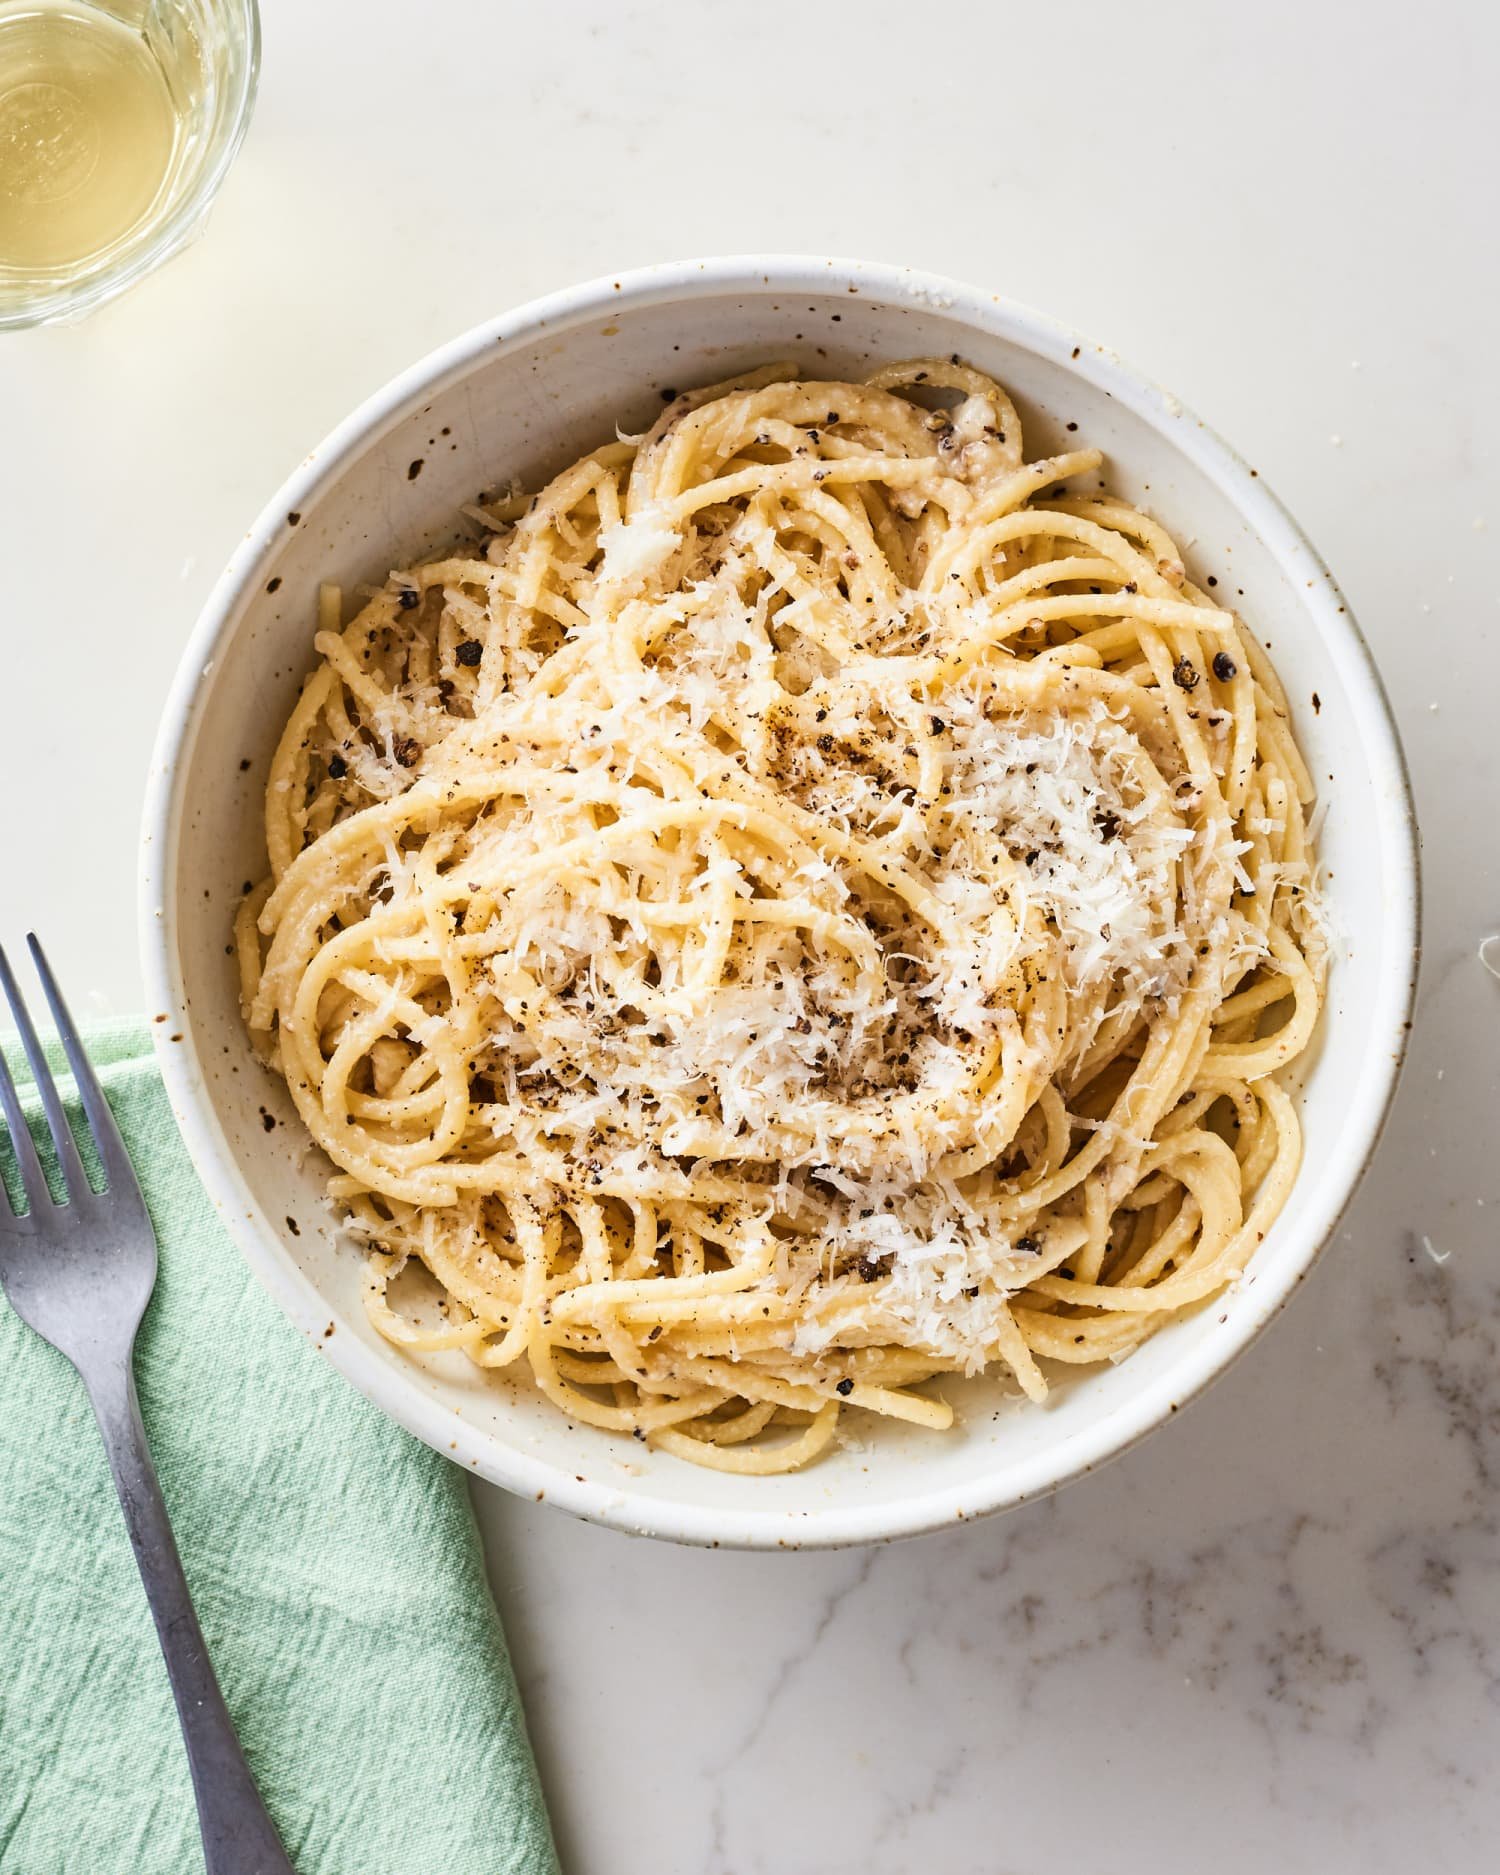 How To Make Cacio e Pepe: The Easiest Method for Perfect Results Every Time